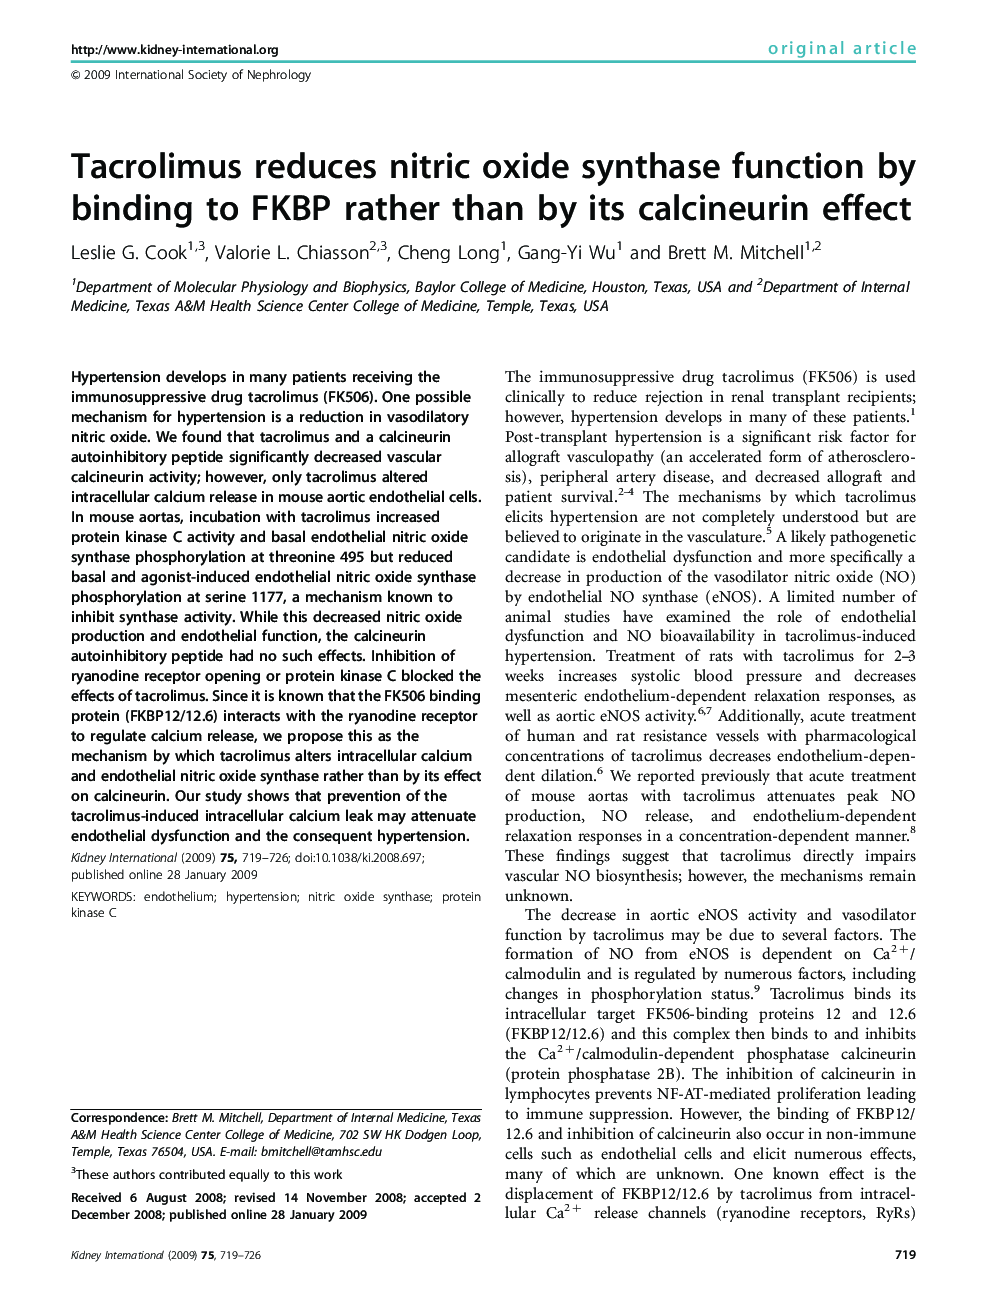 Tacrolimus reduces nitric oxide synthase function by binding to FKBP rather than by its calcineurin effect 